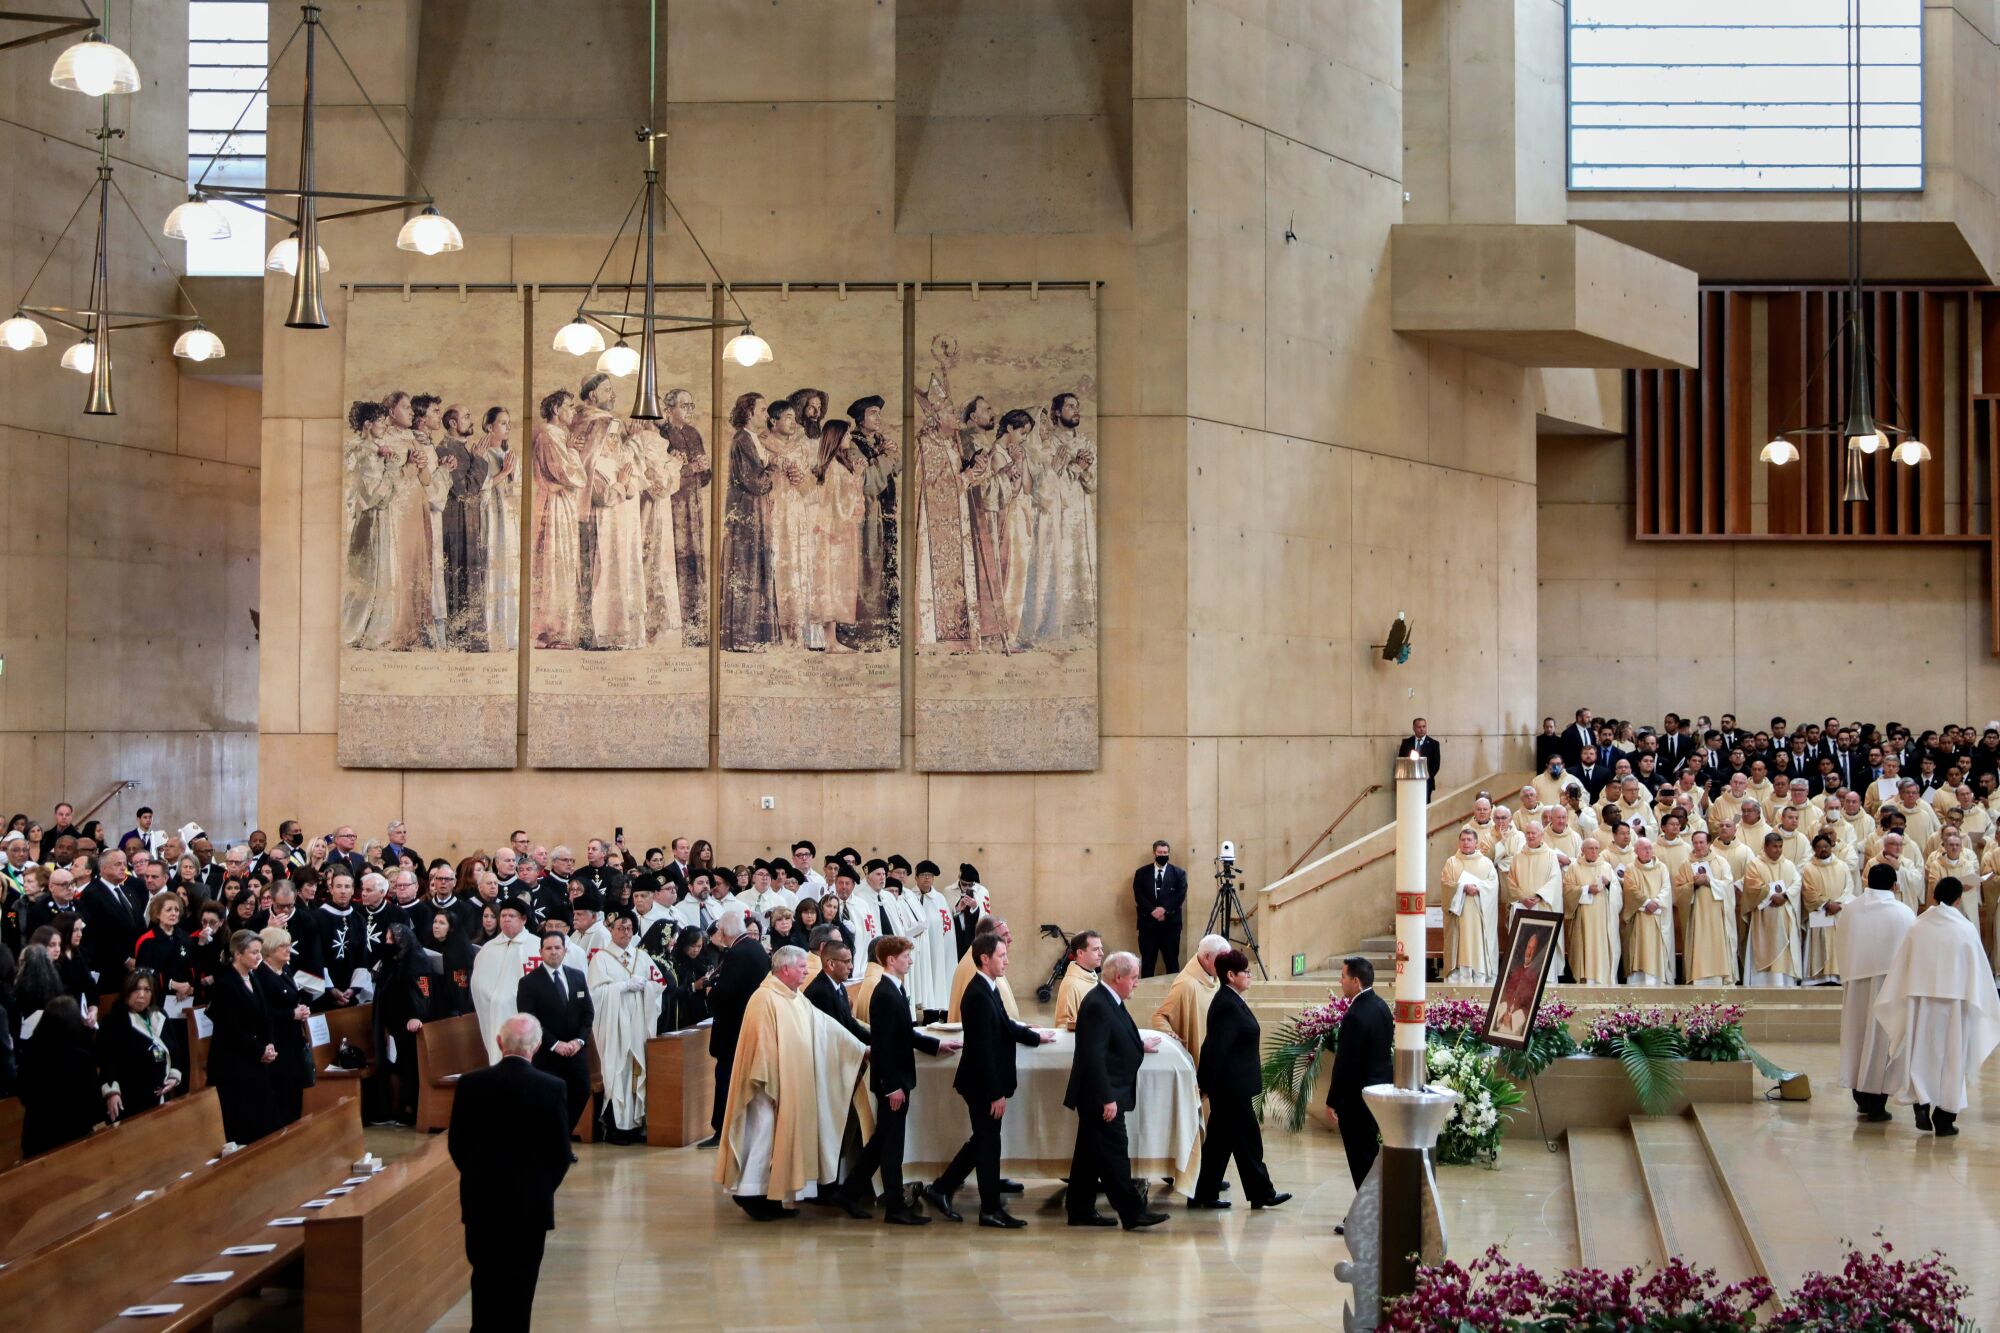 The casket of Bishop David O'Connell arrives at the Cathedral of Our Lady of the Angels in downtown Los Angeles